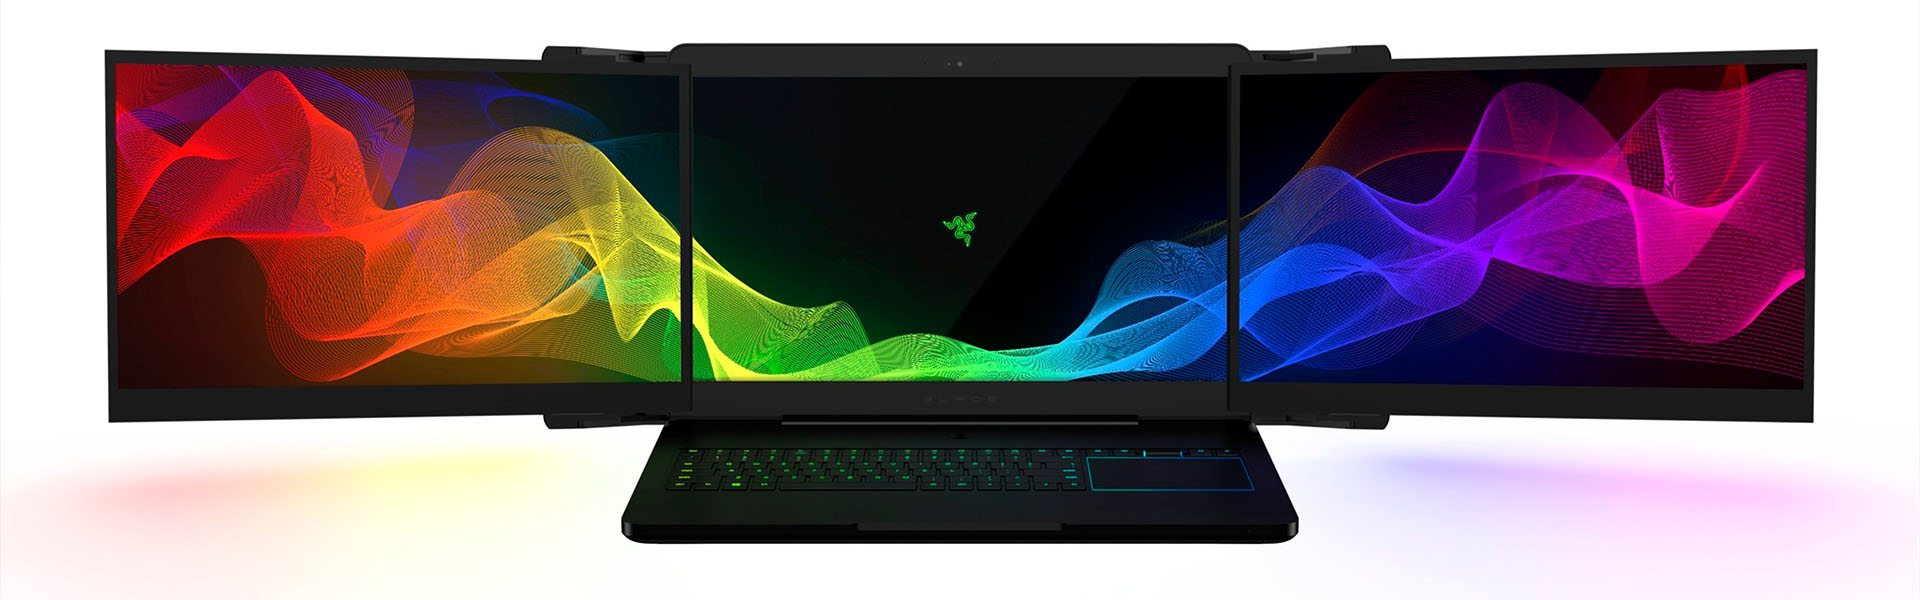 Razer Unveils Project Valerie: World's First Concept Design For Portable Multi-Monitor Immersive Gaming 14